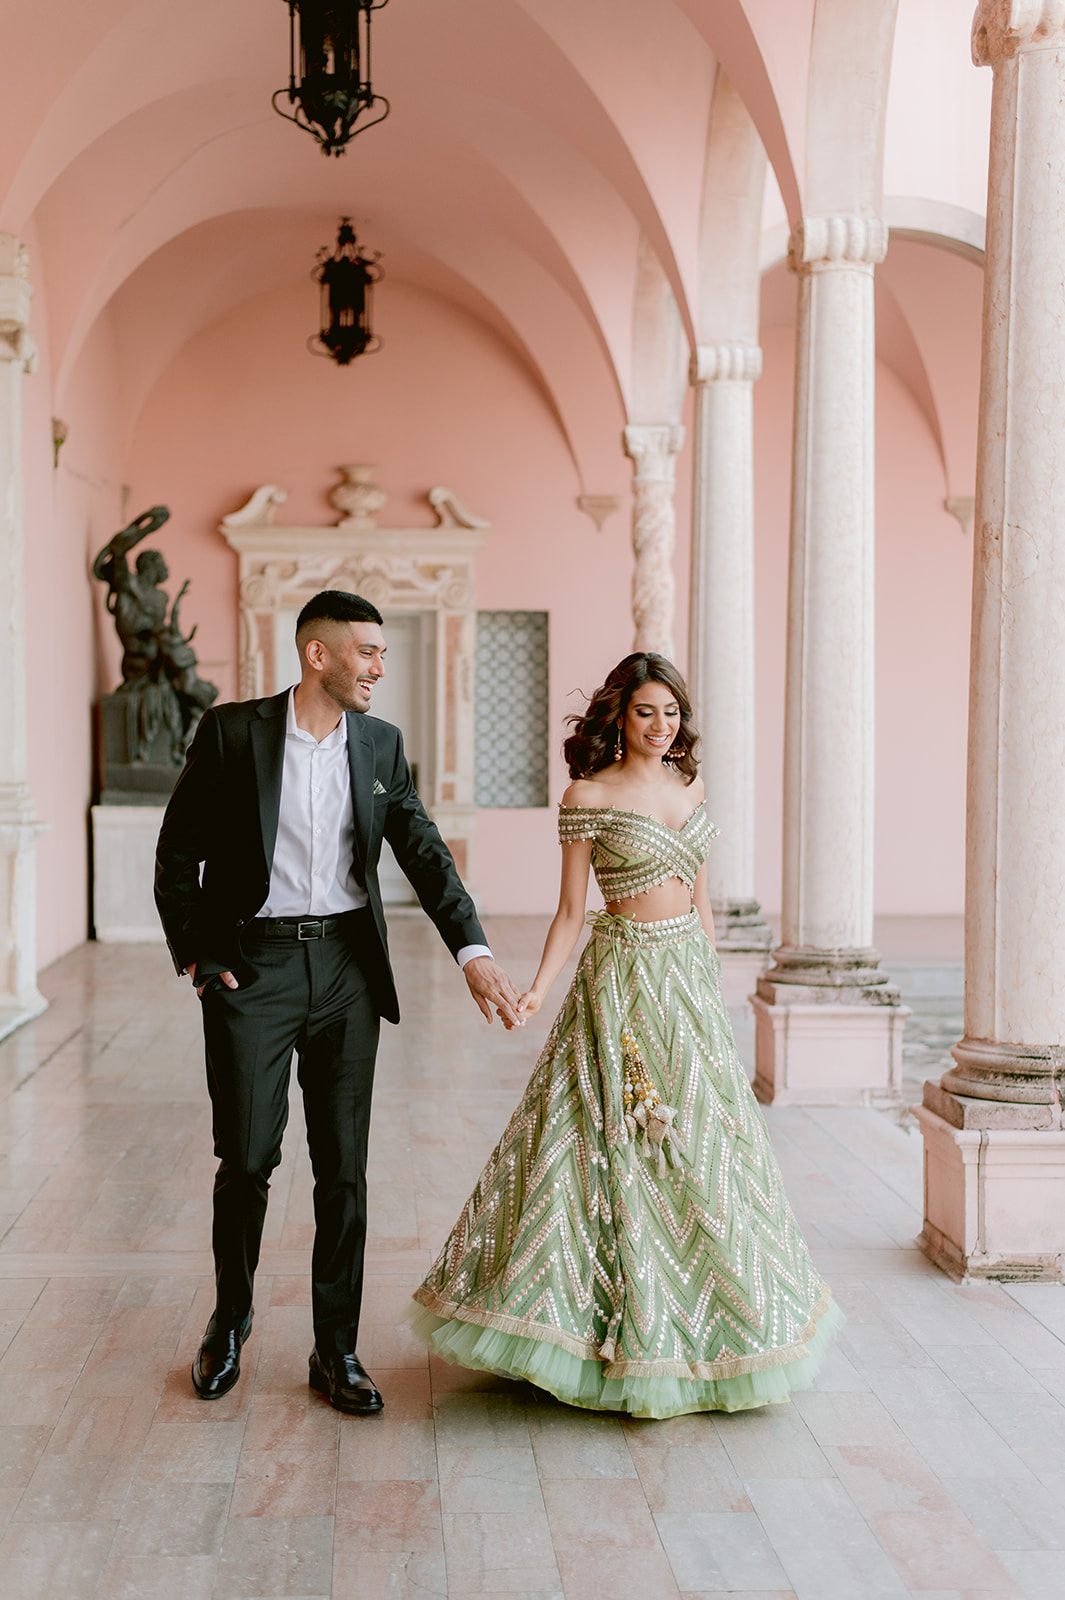 "Romantic couple's engagement session at the Ringling Museum"
